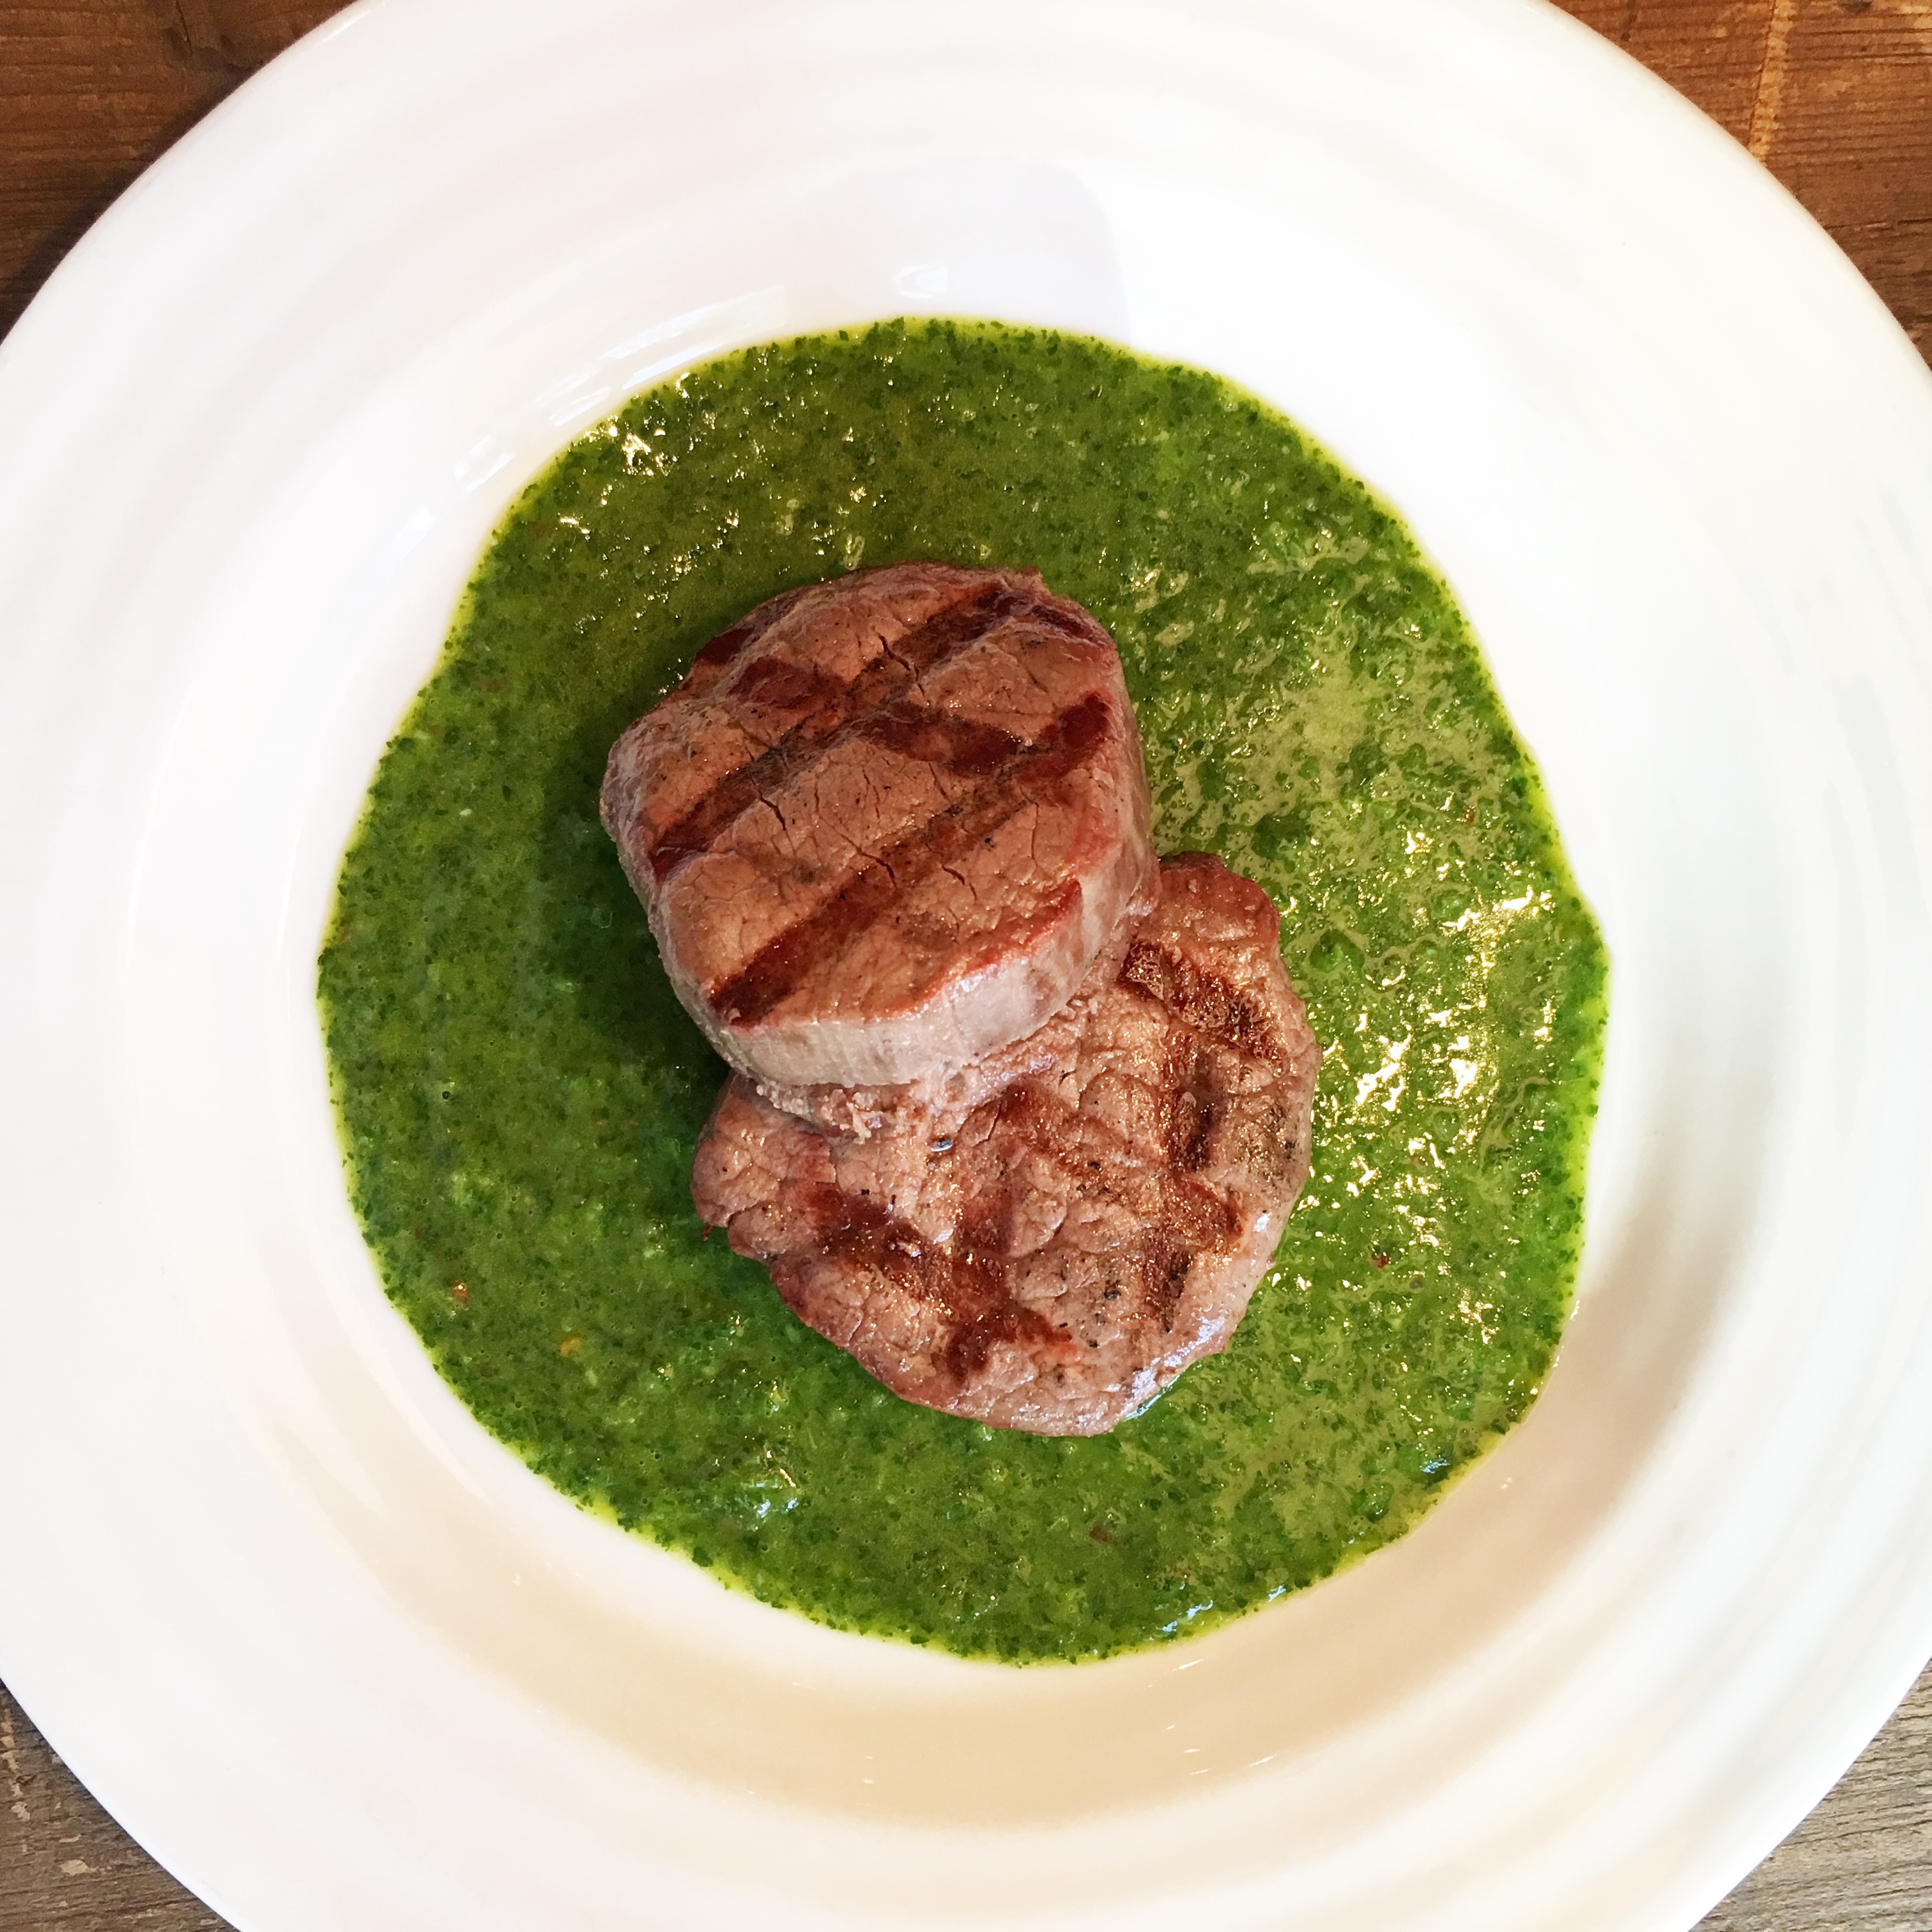 filet with chimichurri sauce, easy sauce